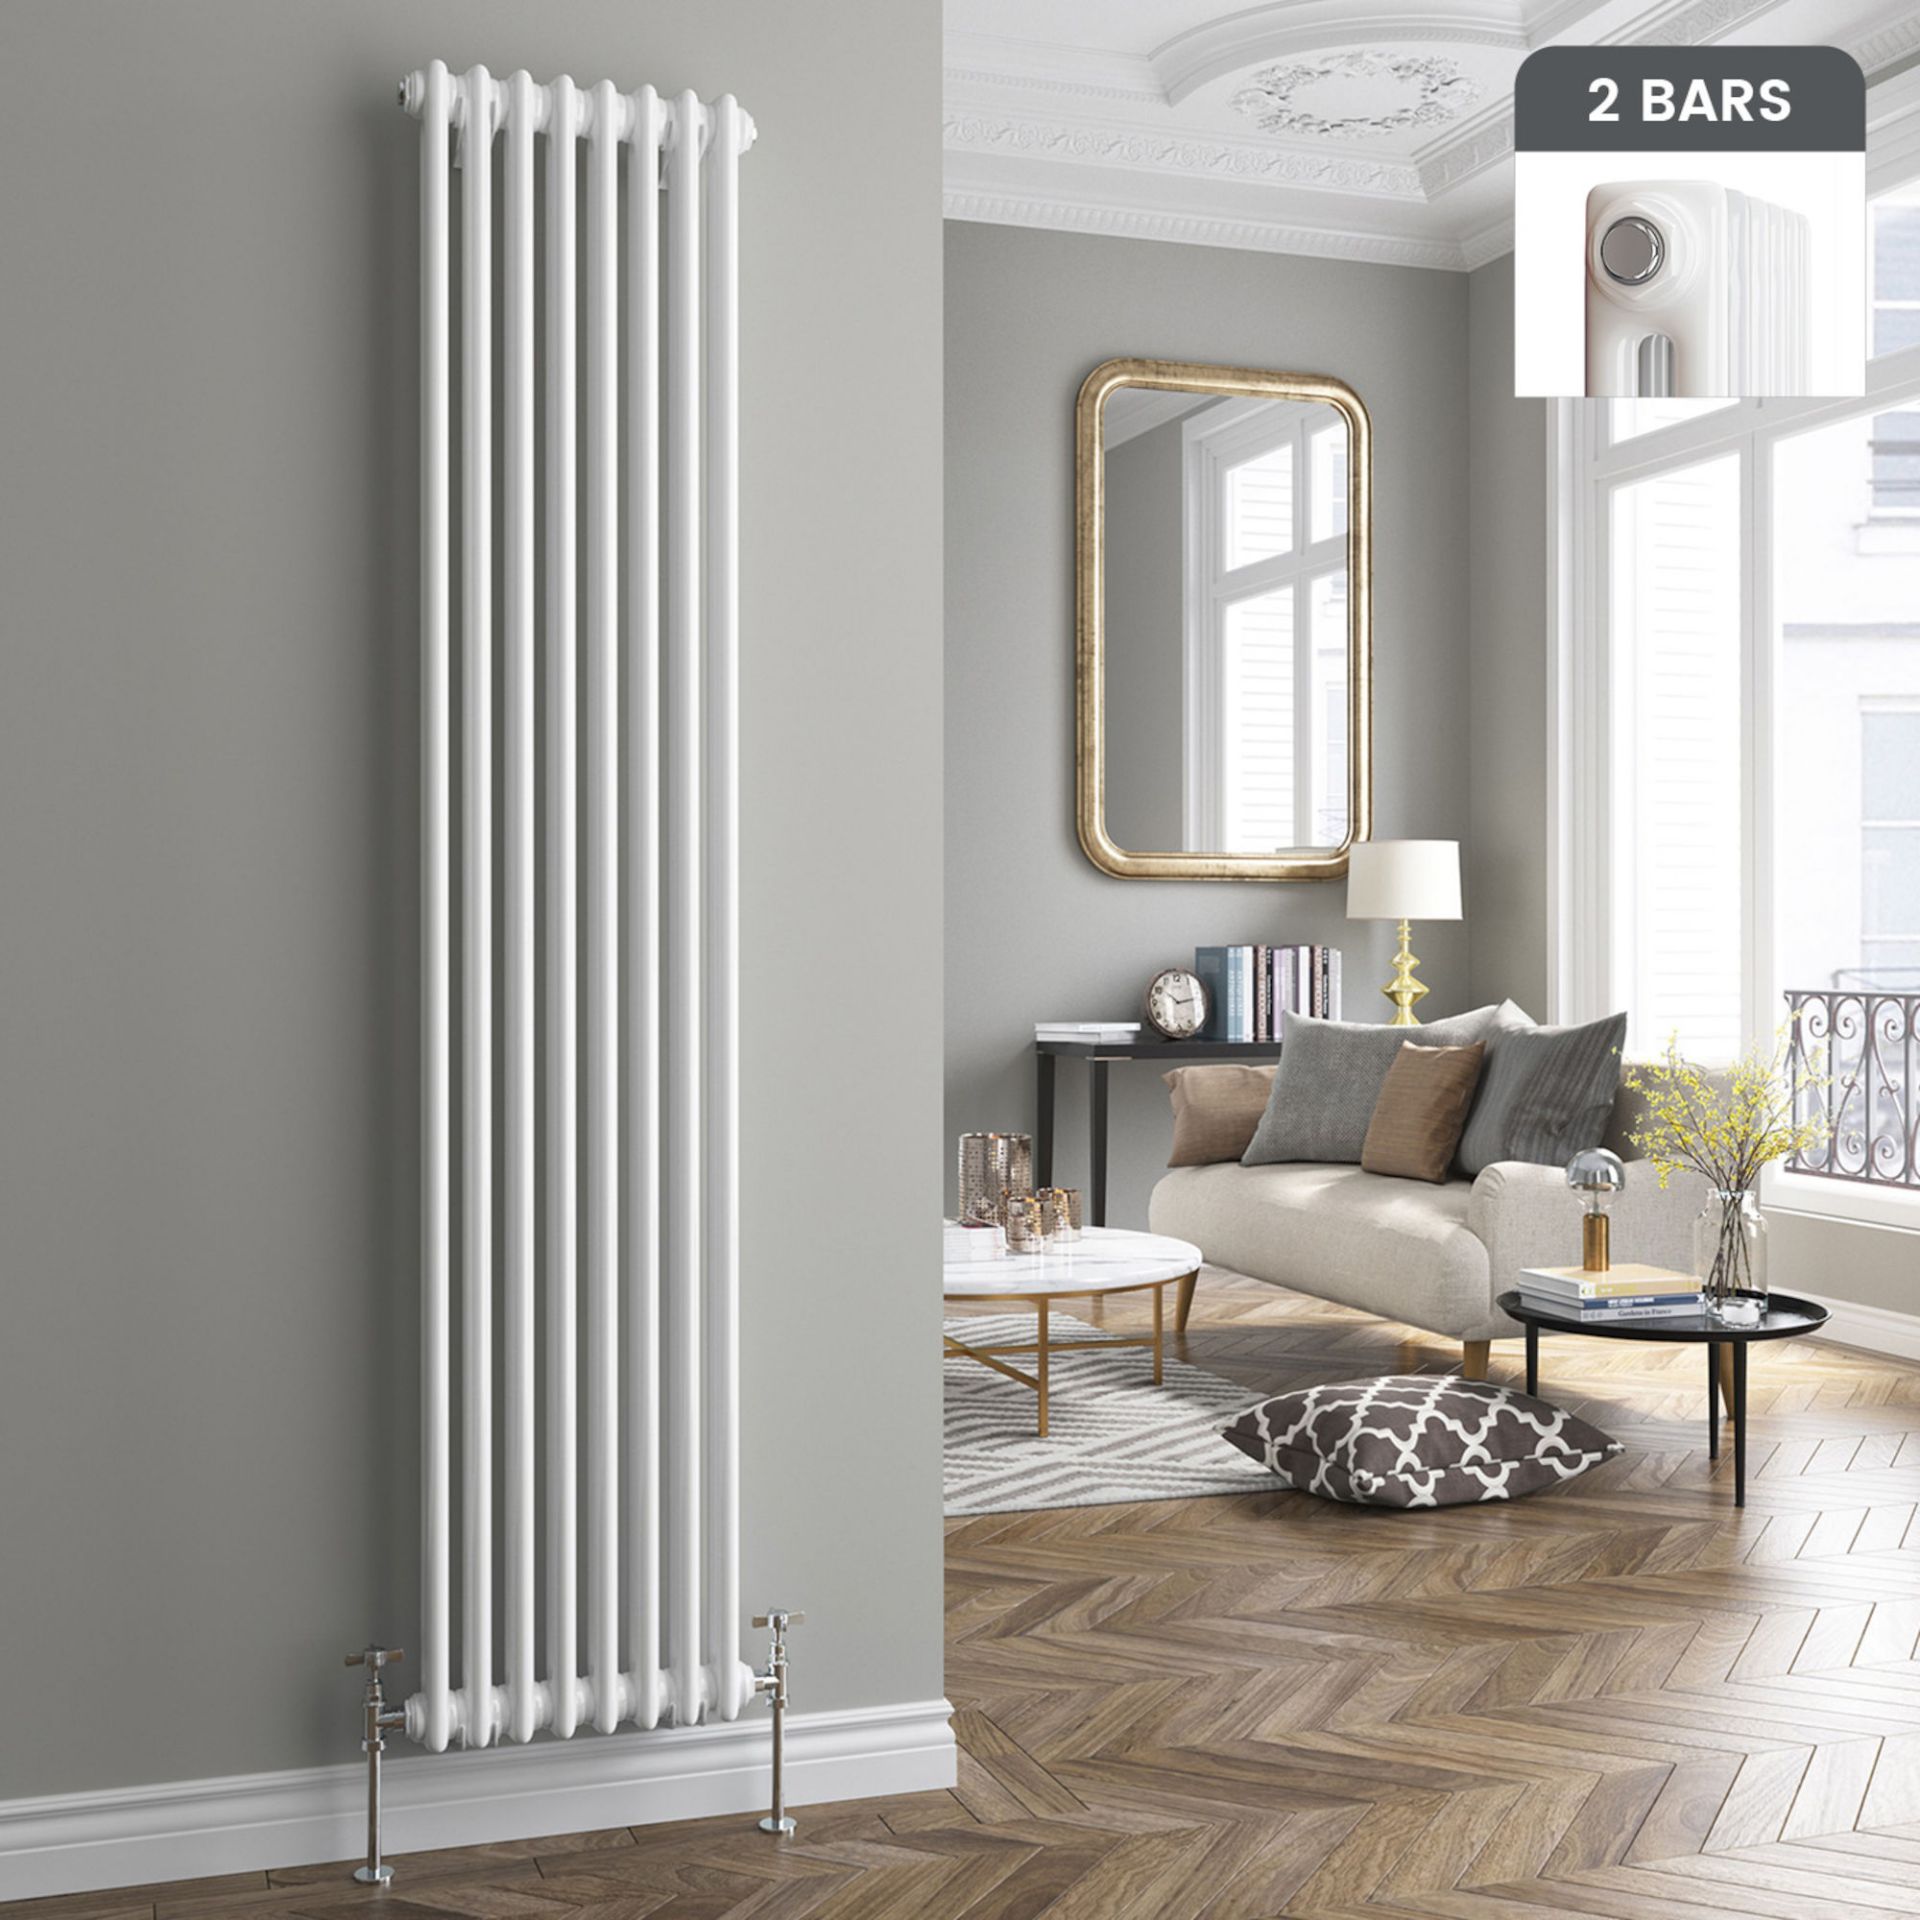 (RR86) 2000x490mm White Double Panel Vertical Colosseum Traditional Radiator. RRP £479.99.For ...(( - Image 3 of 3